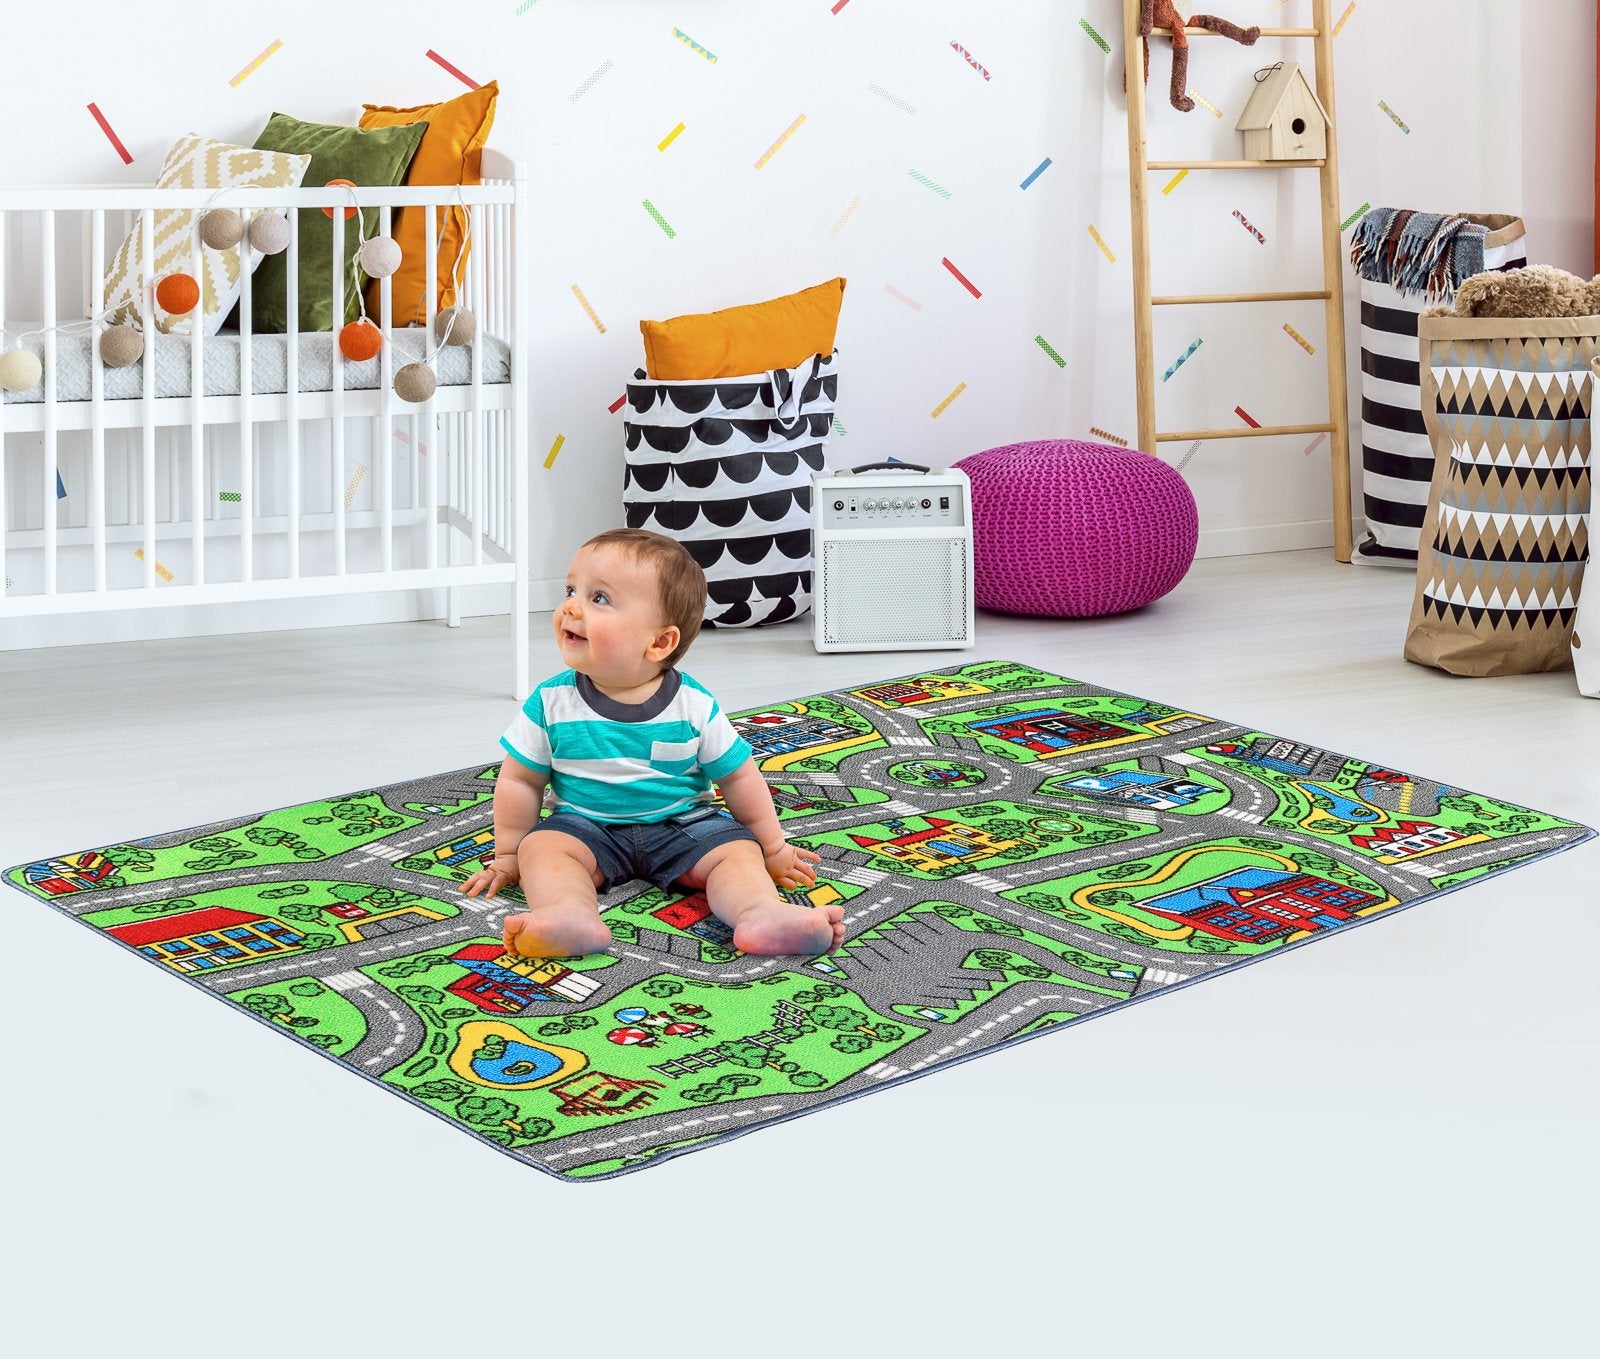 Click N’ Play City Life Kids Road Traffic Play mat Rug Large Non-Slip Carpet Fun Educational for Play area Playroom Bedroom-59” x 31 1/2”